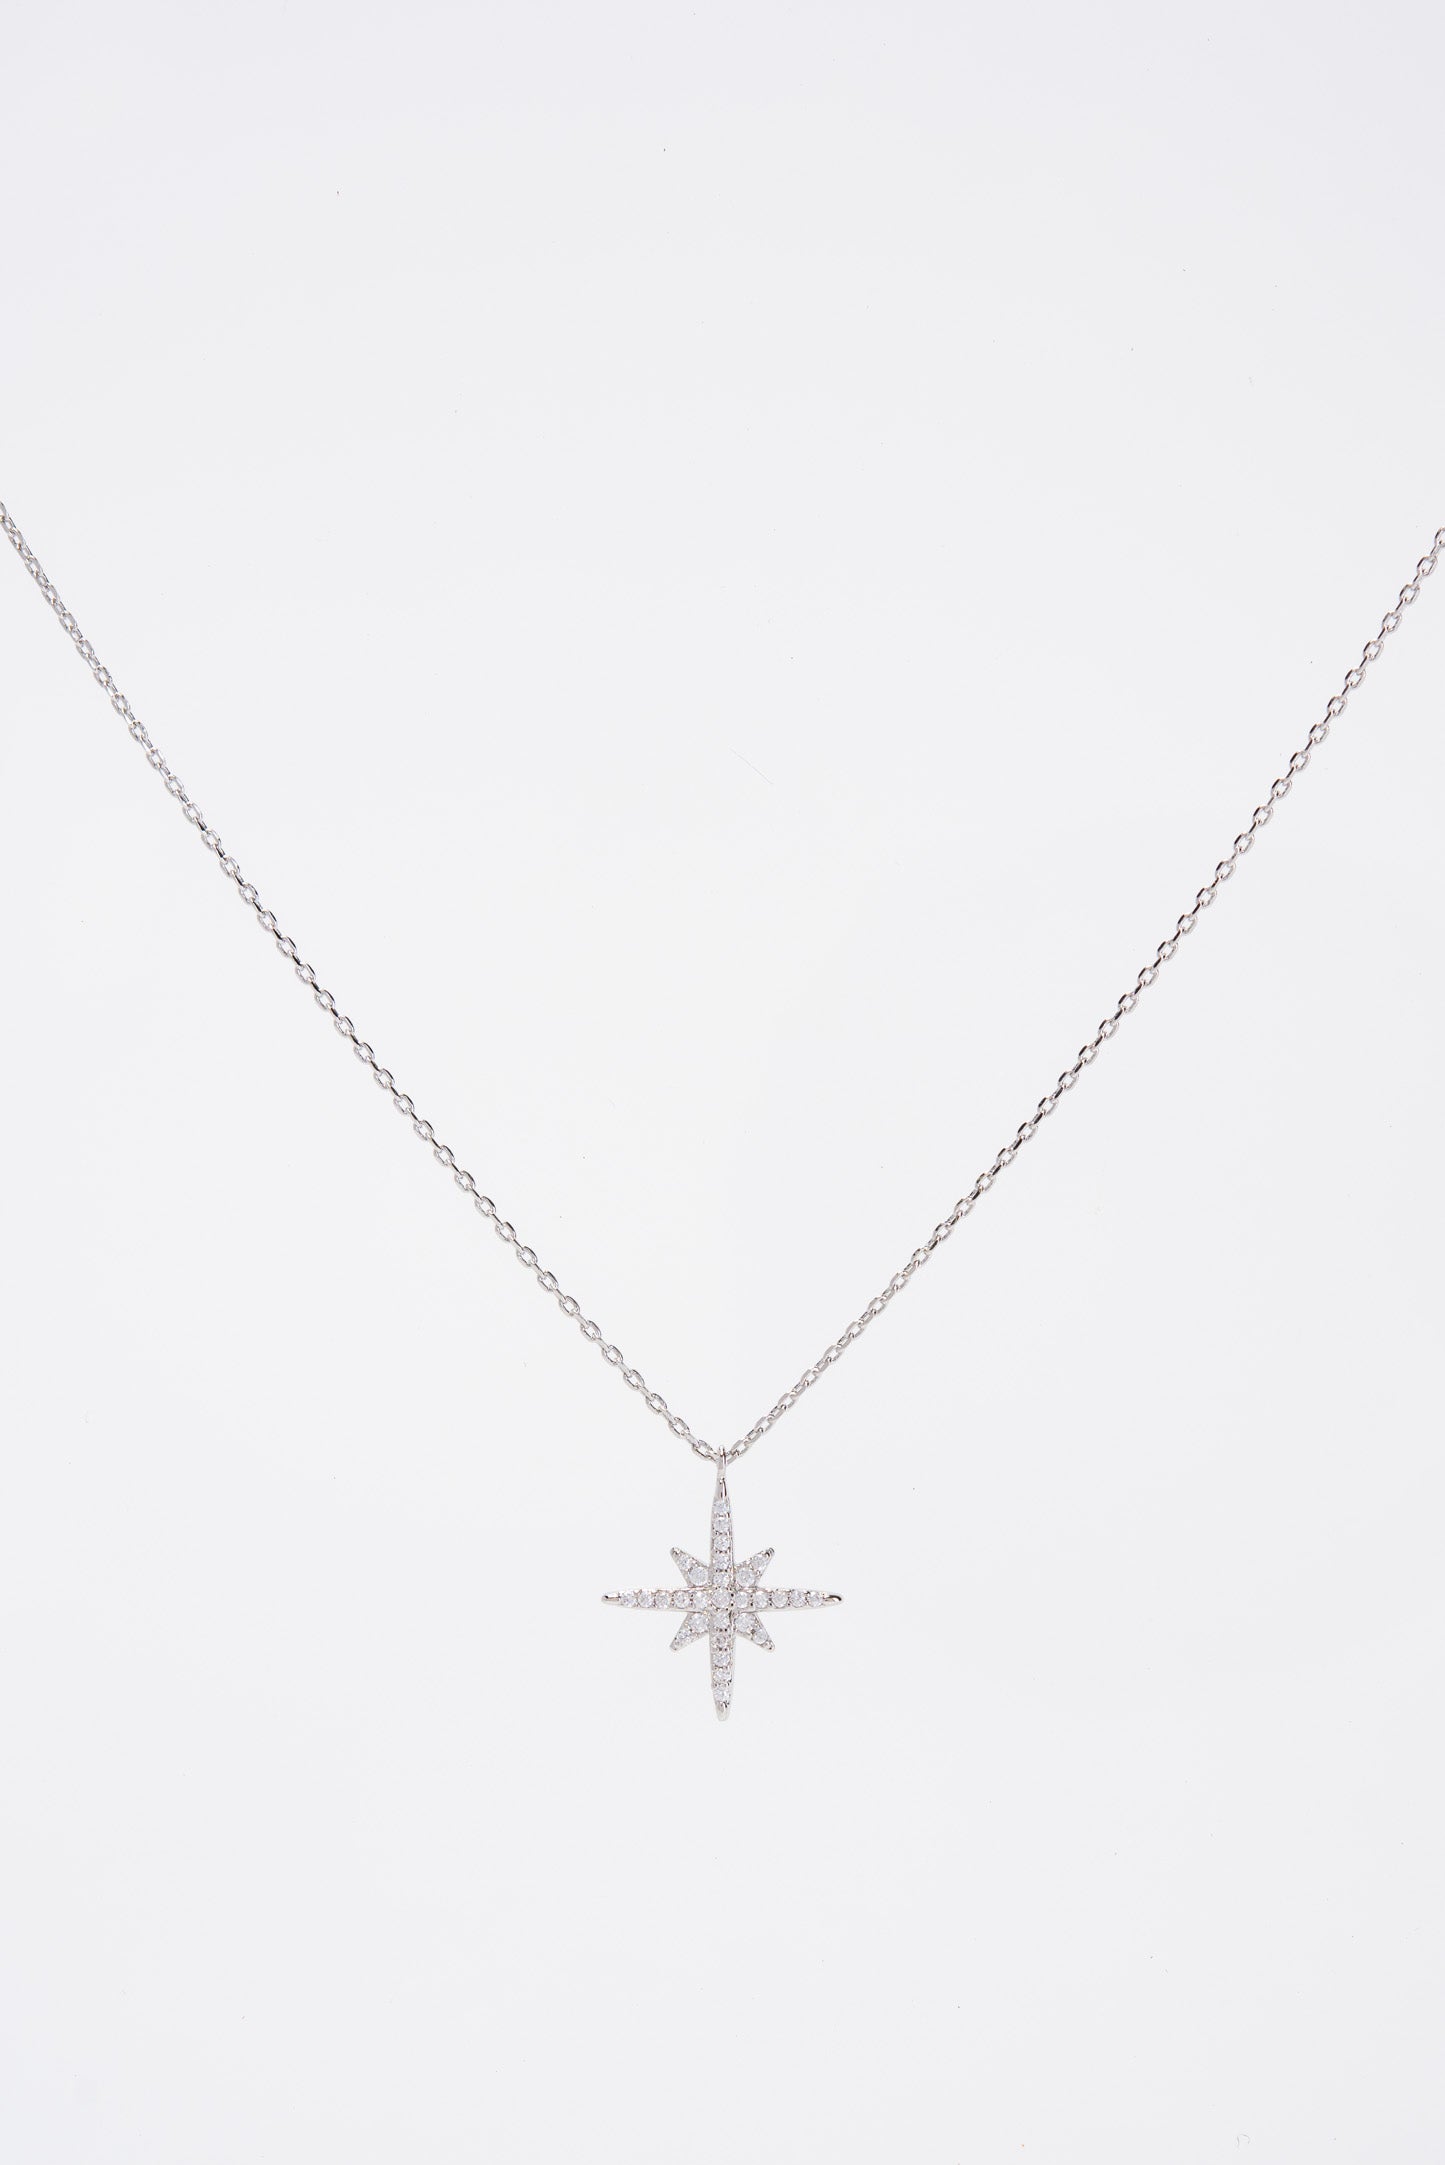 Isla 15 in Gold Plated CZ Star Pendant Necklace - Silver